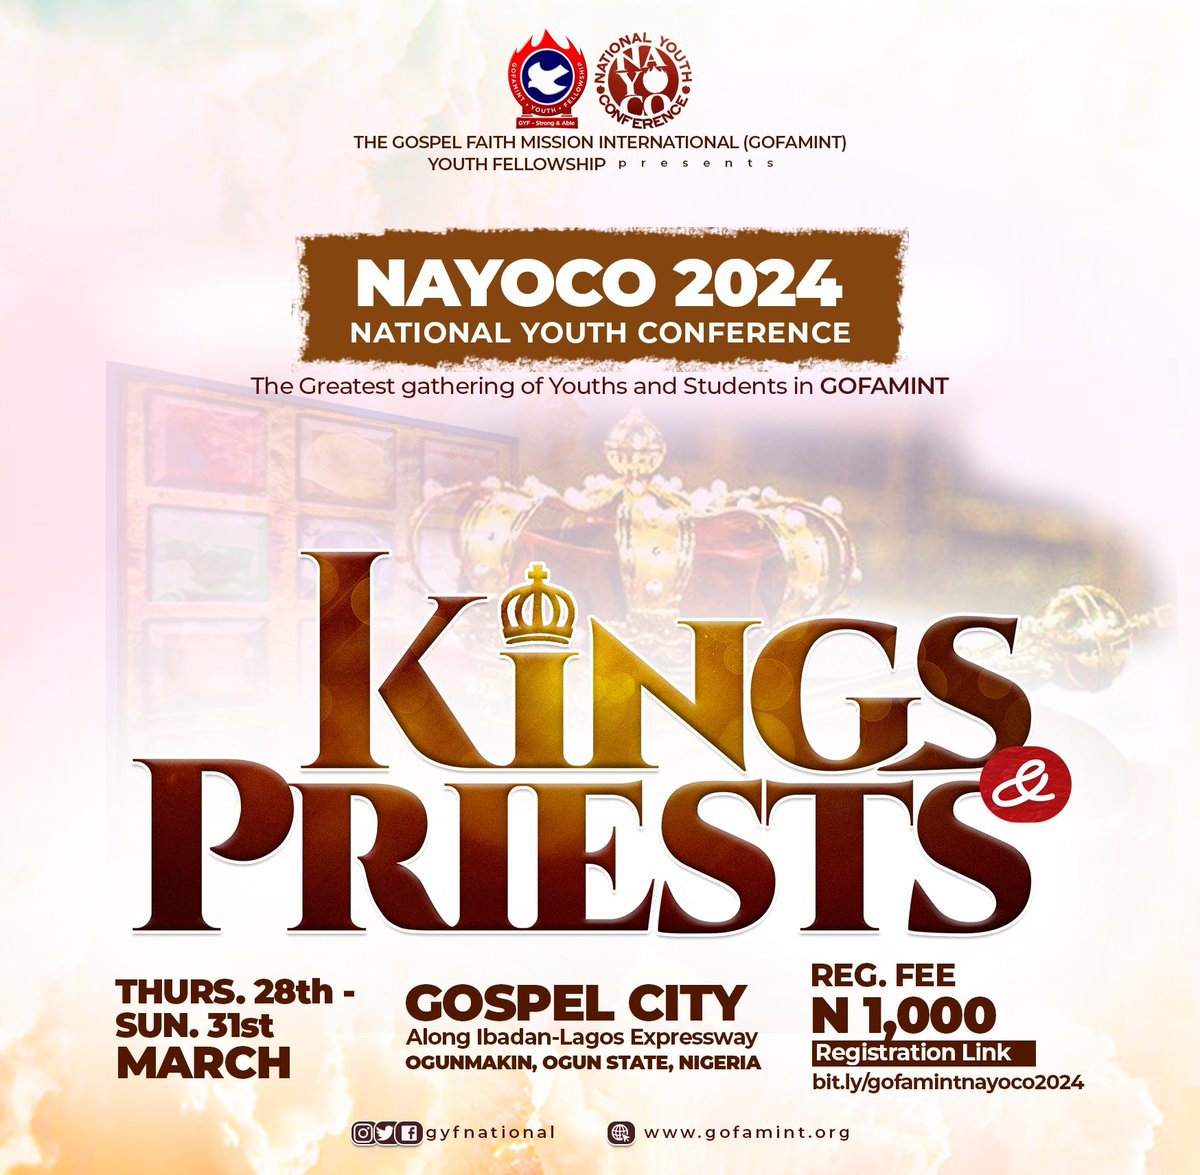 We are ready. Come join us for this special meeting and the Lord will do you good.

#NAYOCO2024
#kingsandpriests
#godlygems
#GYFNational
#GOFAMINT